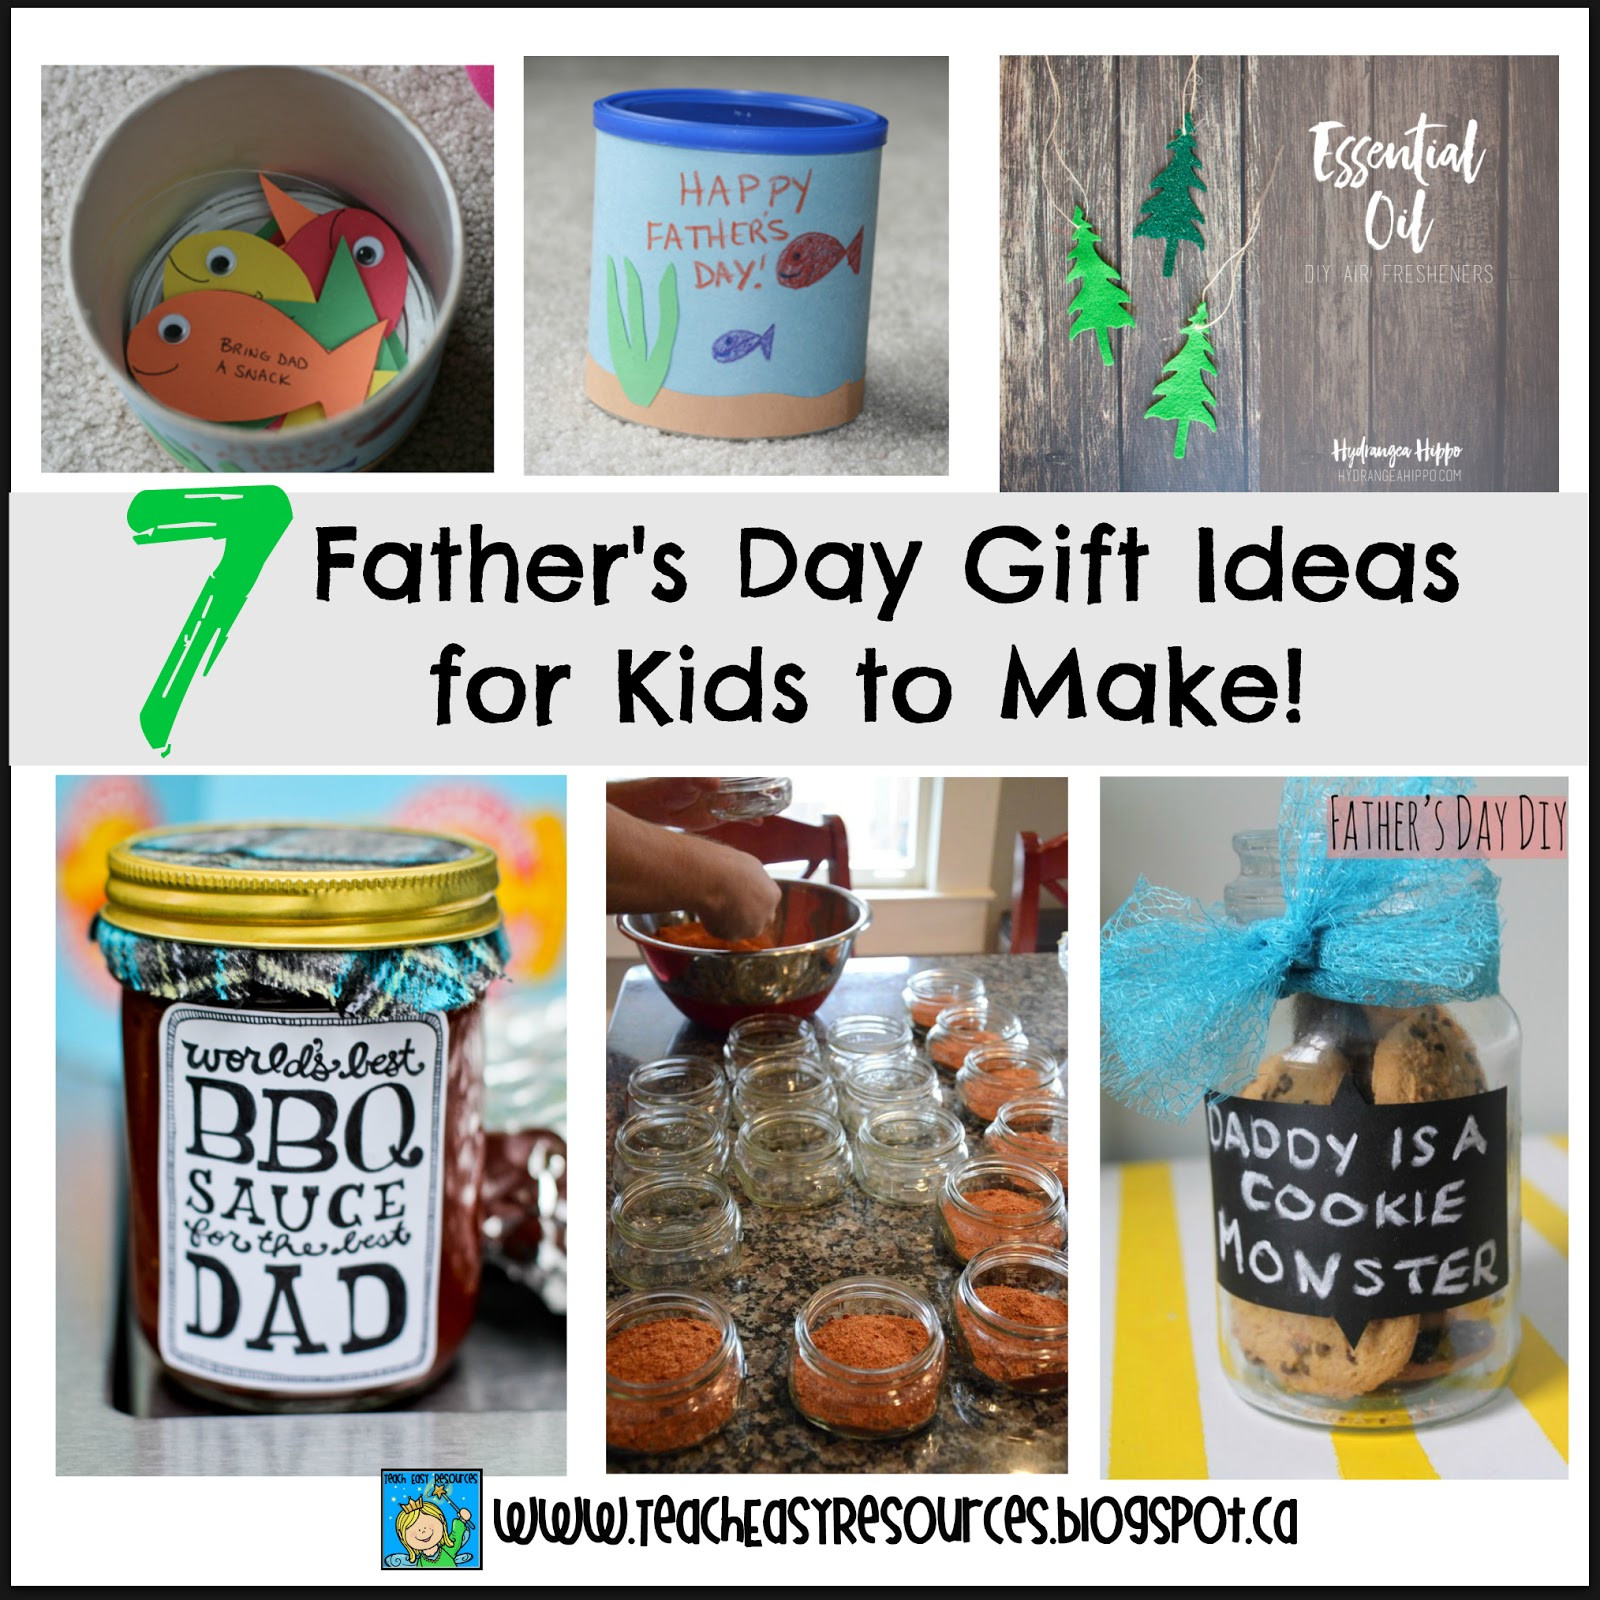 Ideas For Fathers Day Gifts
 Teach Easy Resources Father s Day Gift Ideas that Kids